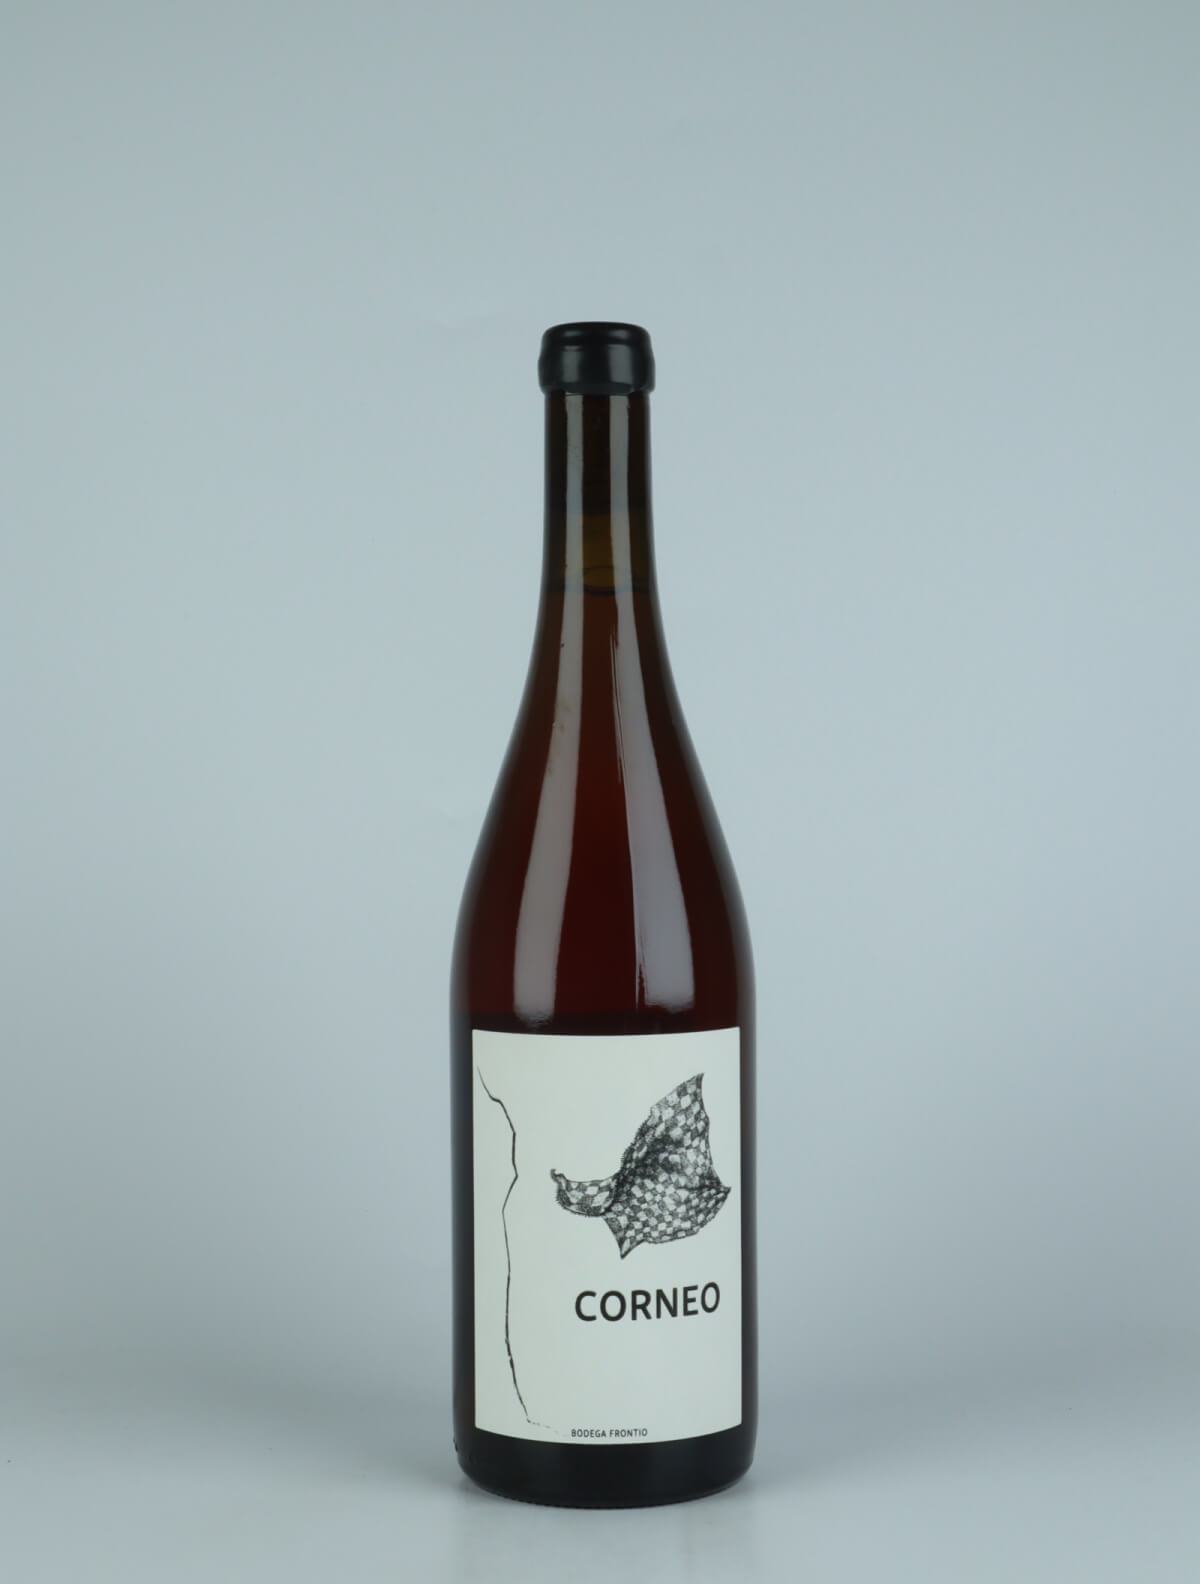 A bottle 2021 Corneo Rosé from Bodega Frontio, Arribes in Spain